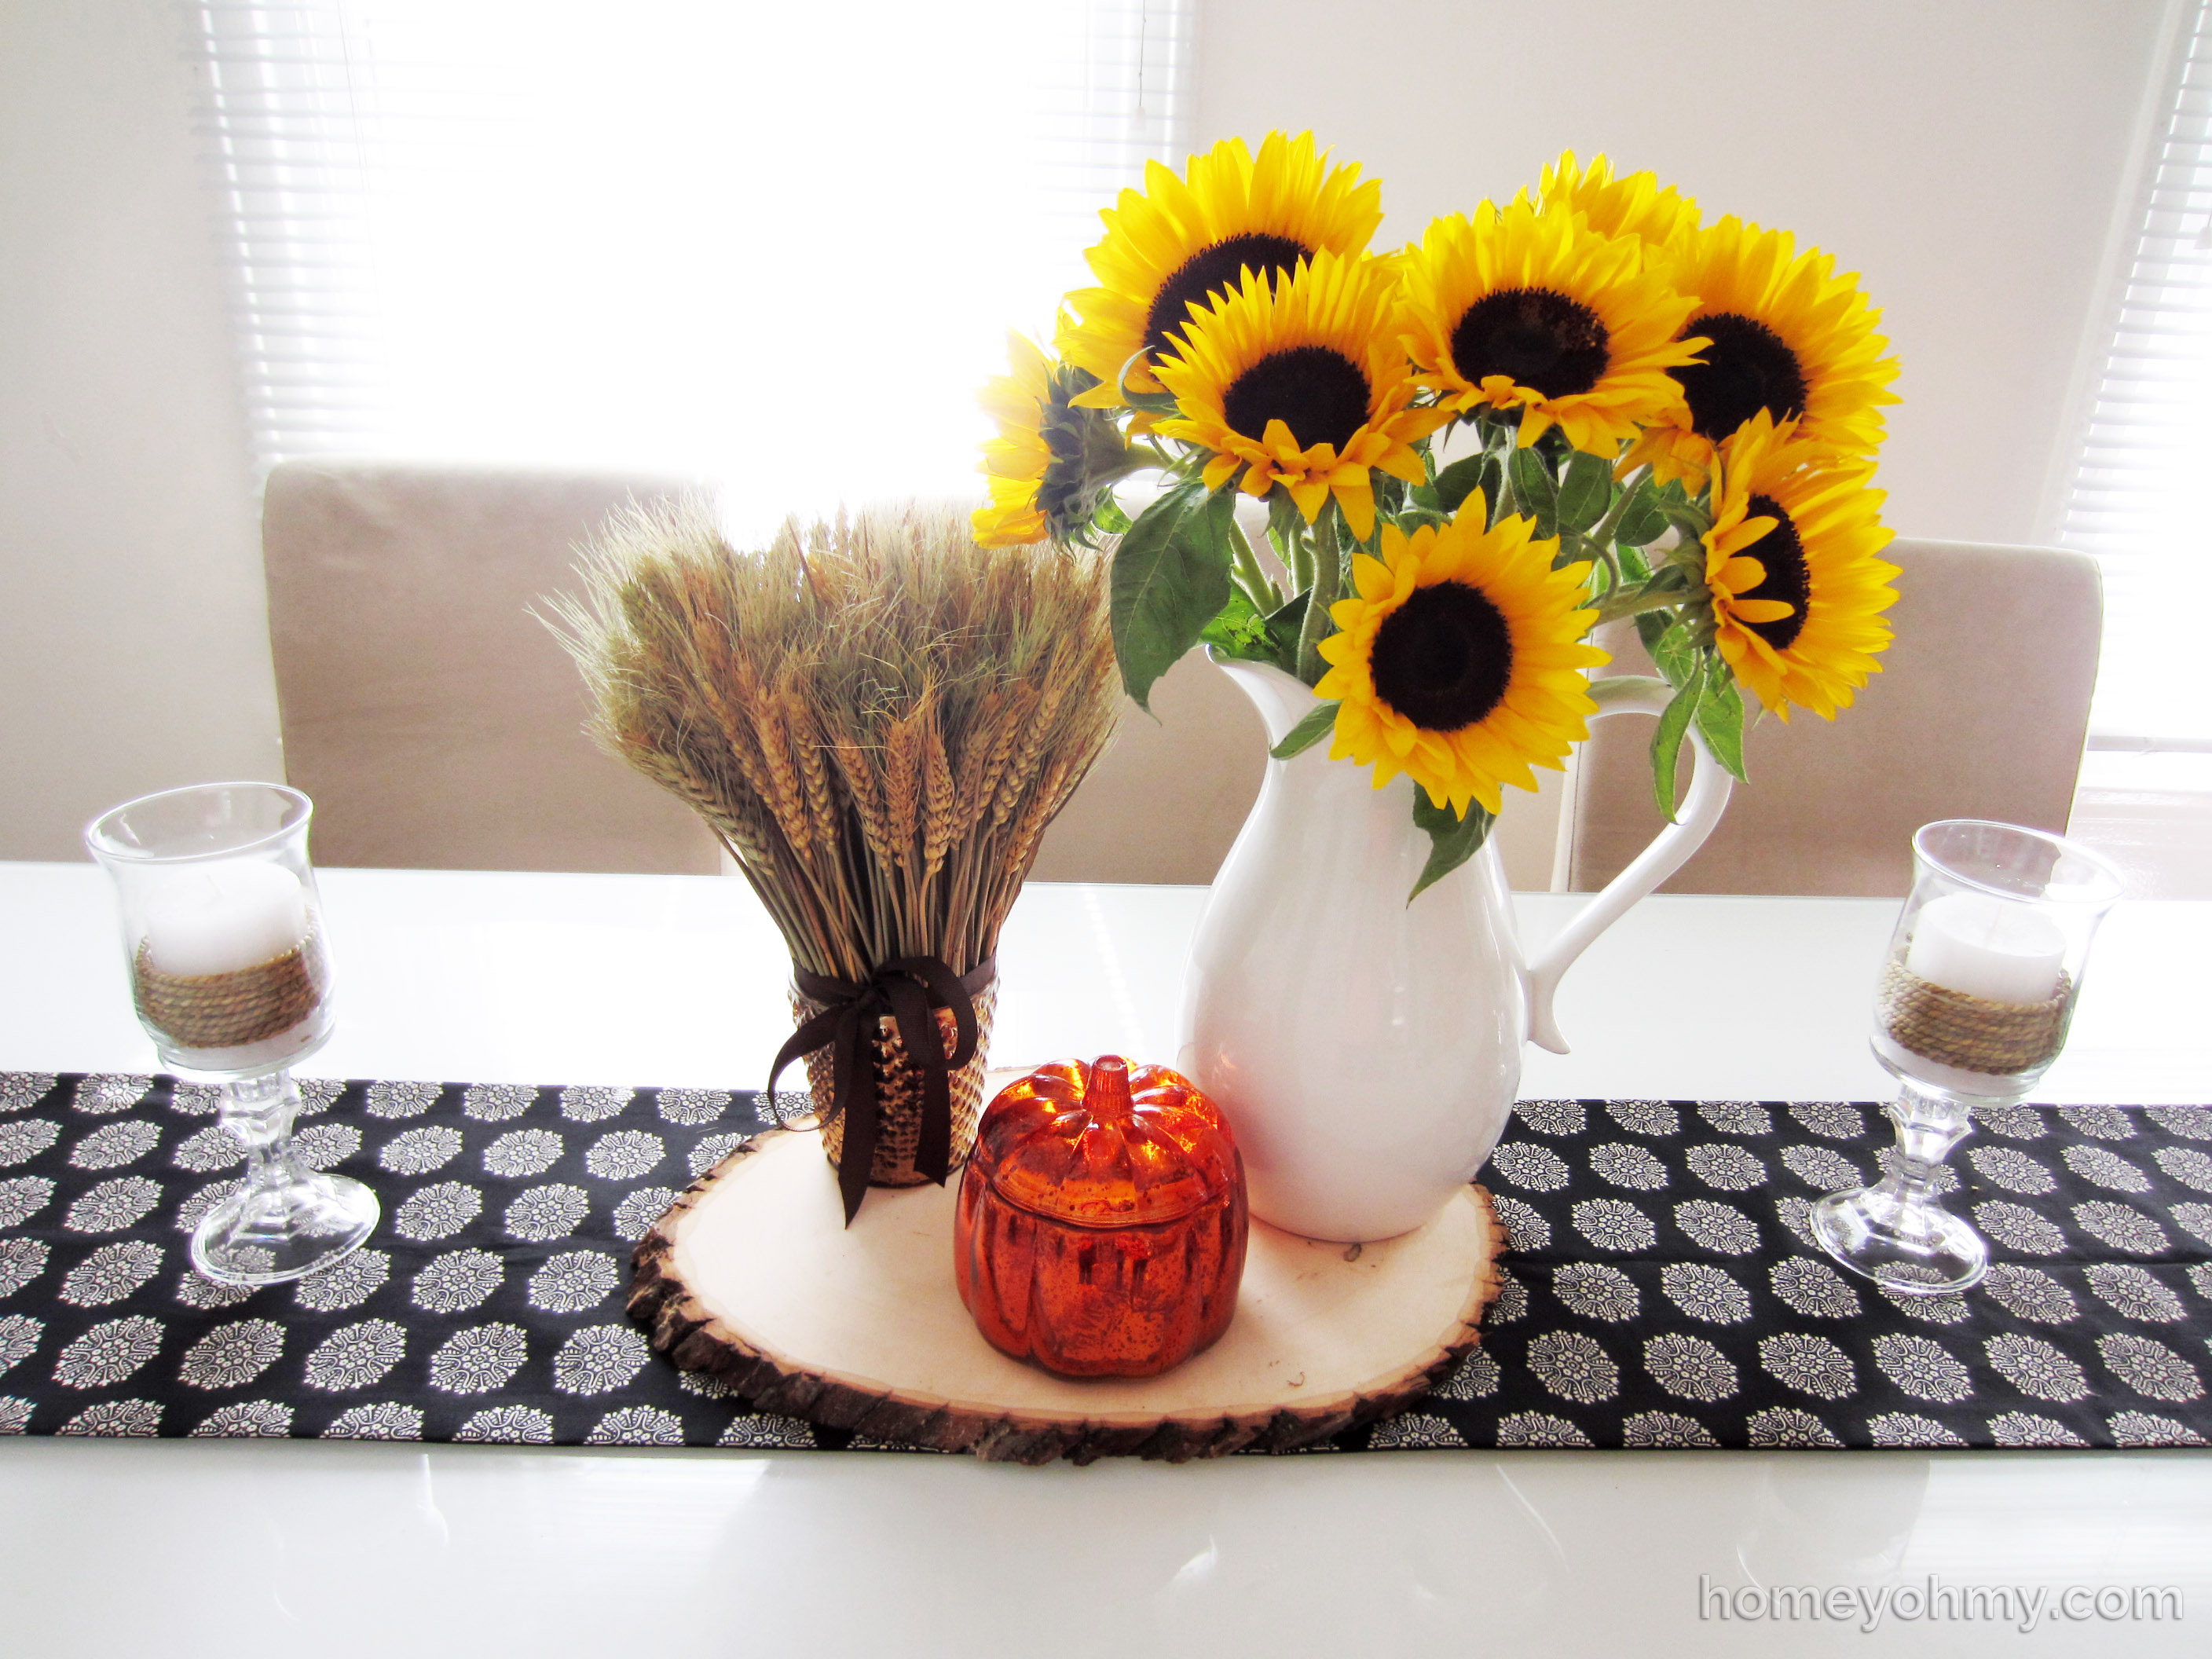 Diy No Sew Table Runner Homey Oh My